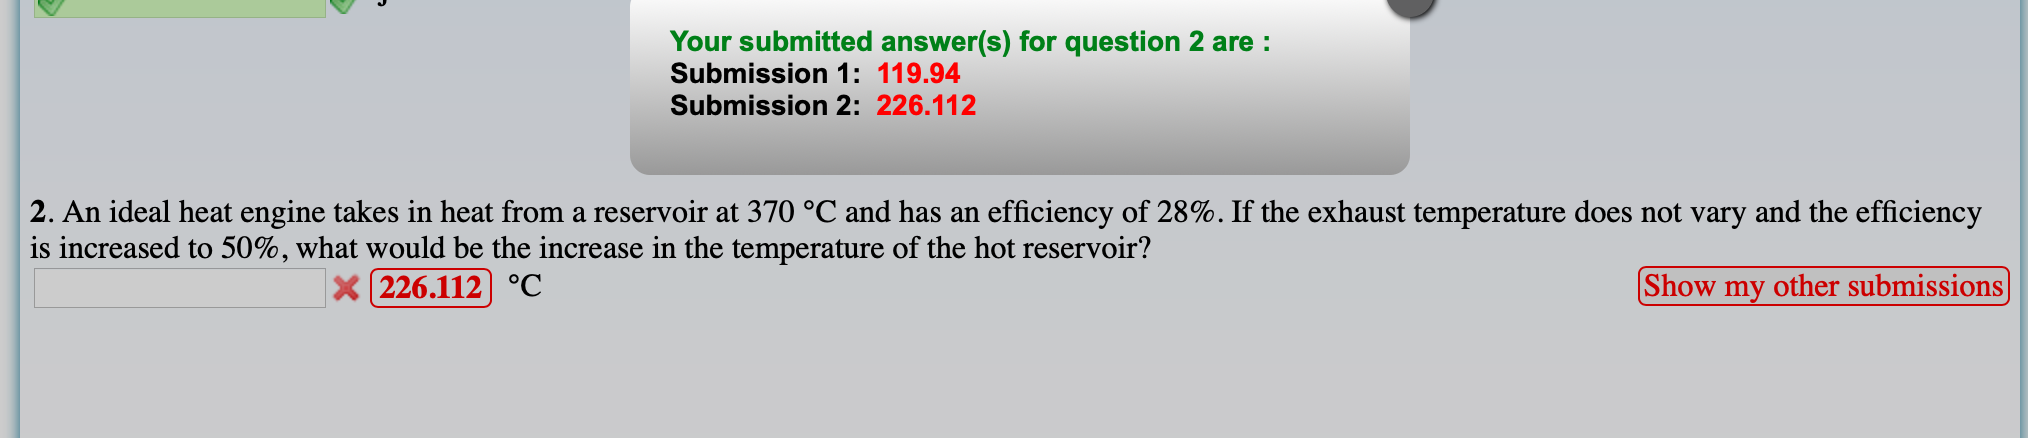 Your submitted answer(s) for question 2 are :
Submission 1: 119.94
Submission 2: 226.112
2. An ideal heat engine takes in heat from a reservoir at 370 °C and has an efficiency of 28%. If the exhaust temperature does not vary and the efficiency
is increased to 50%, what would be the increase in the temperature of the hot reservoir?
| 226.112] °C
Show my other submissions]
